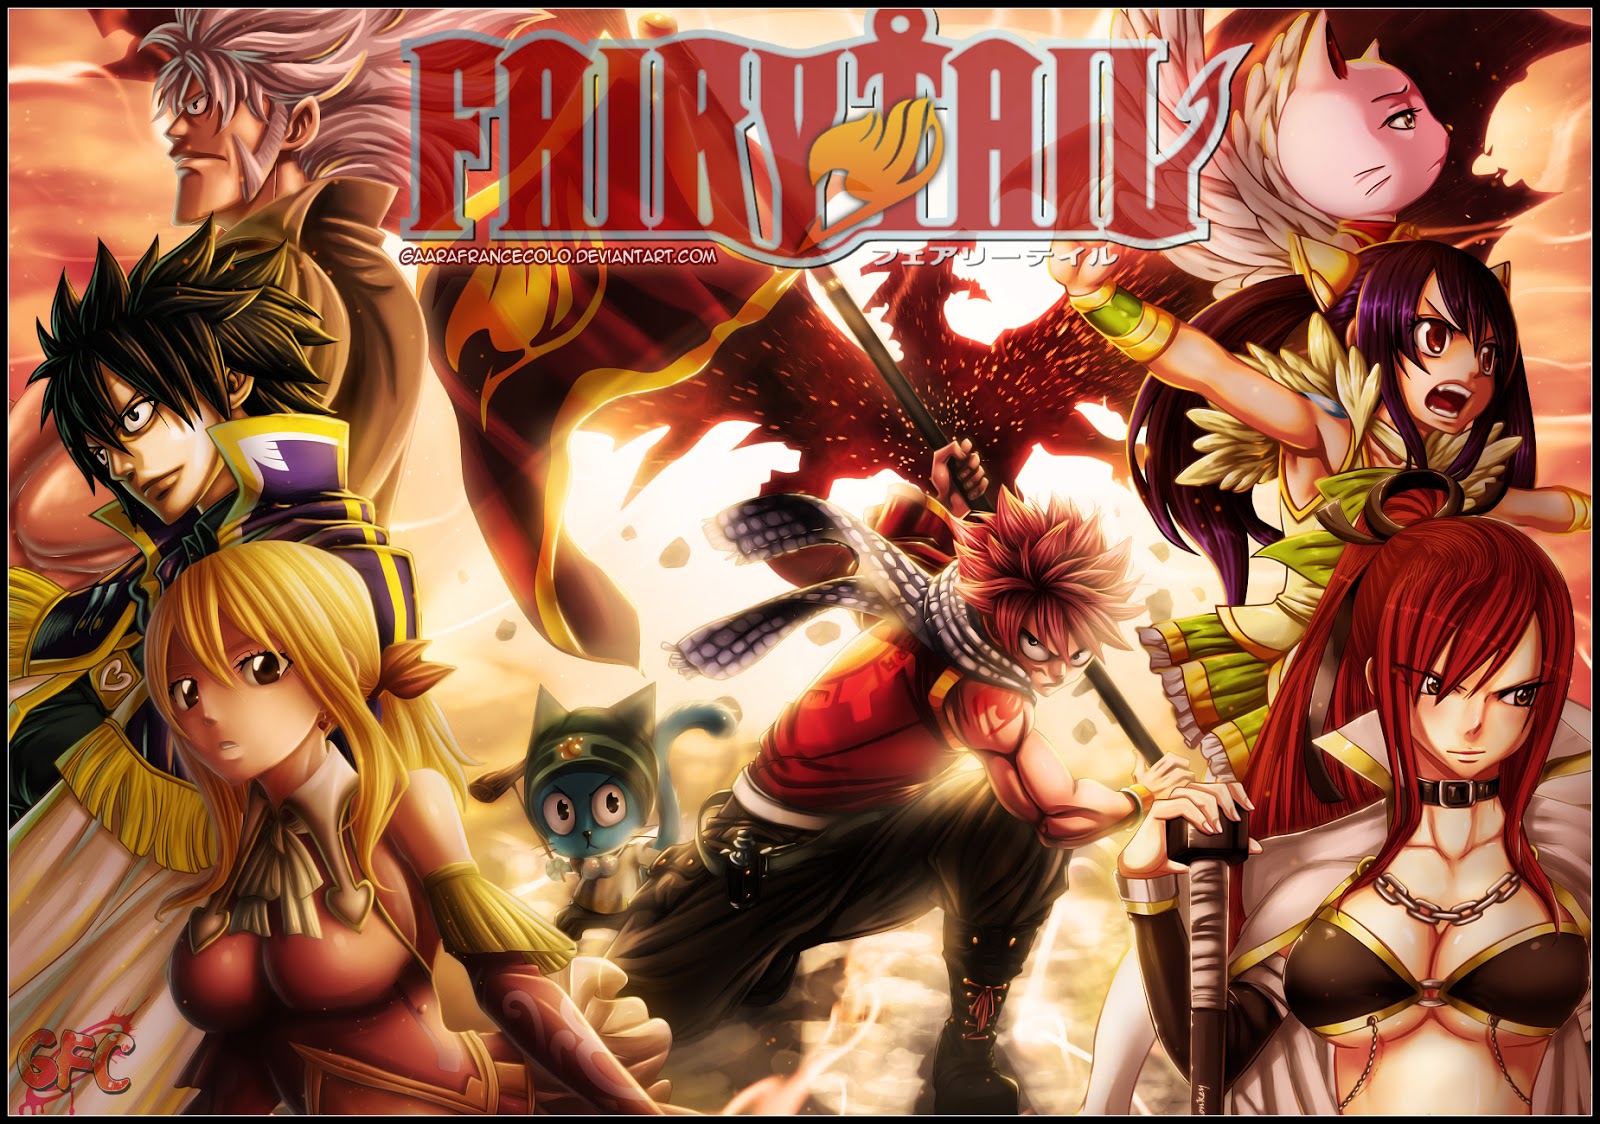 Free Download Fairy Tail Wallpaper 1440x900 Fairy Tail Logos Wallpopercom 1600x1124 For Your Desktop Mobile Tablet Explore 48 Fairytail 15 Wallpapers Fairy Tail Logo Wallpaper Fairy Wallpaper Fairy Background Wallpaper